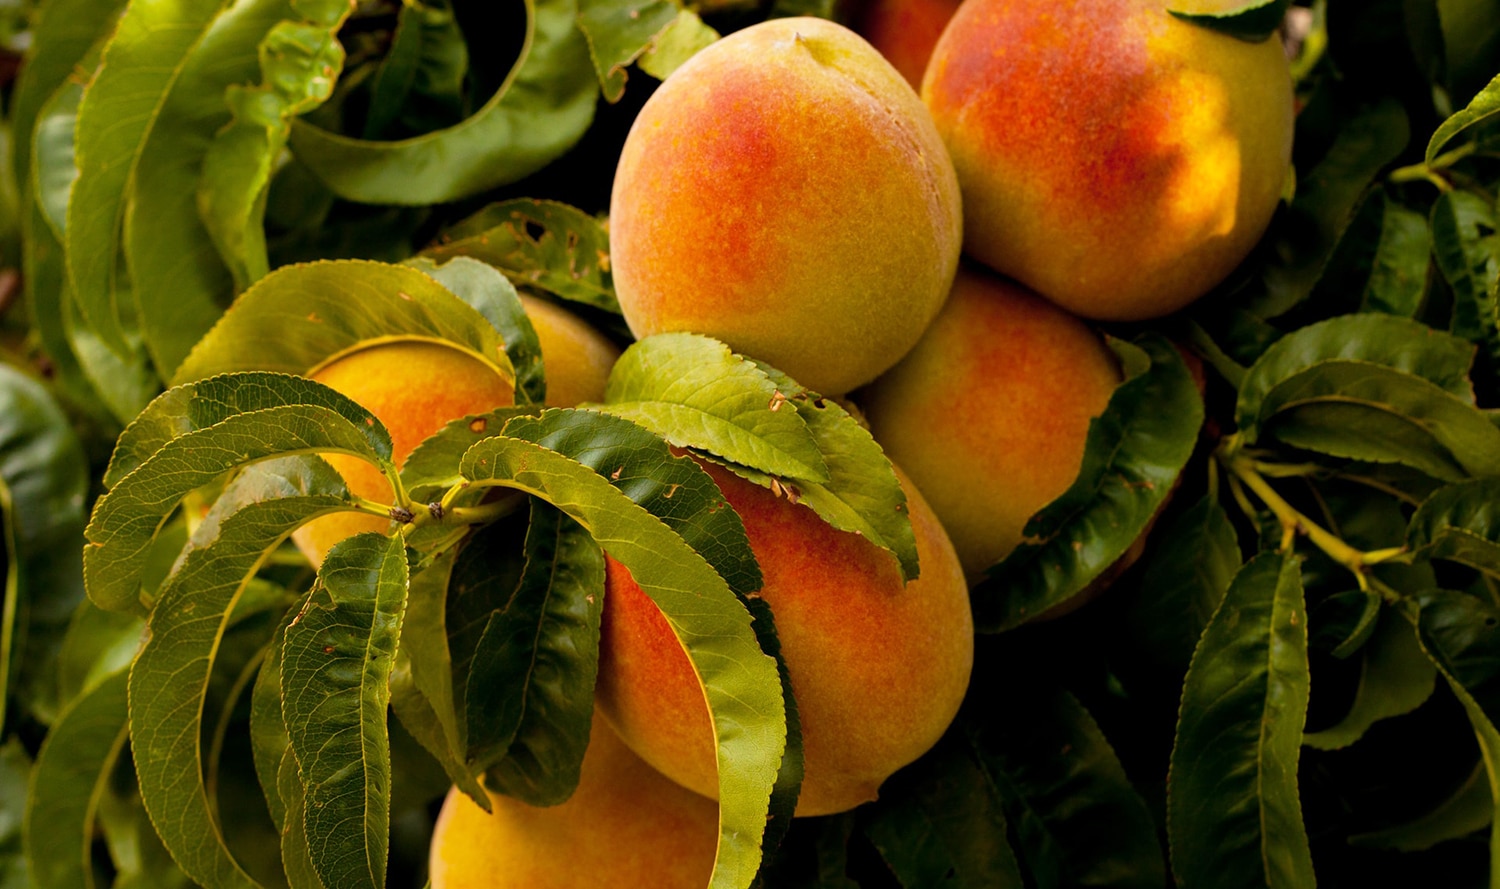 horizontal photo of ripe peaches on the branch of a tree with lots of green leaves.